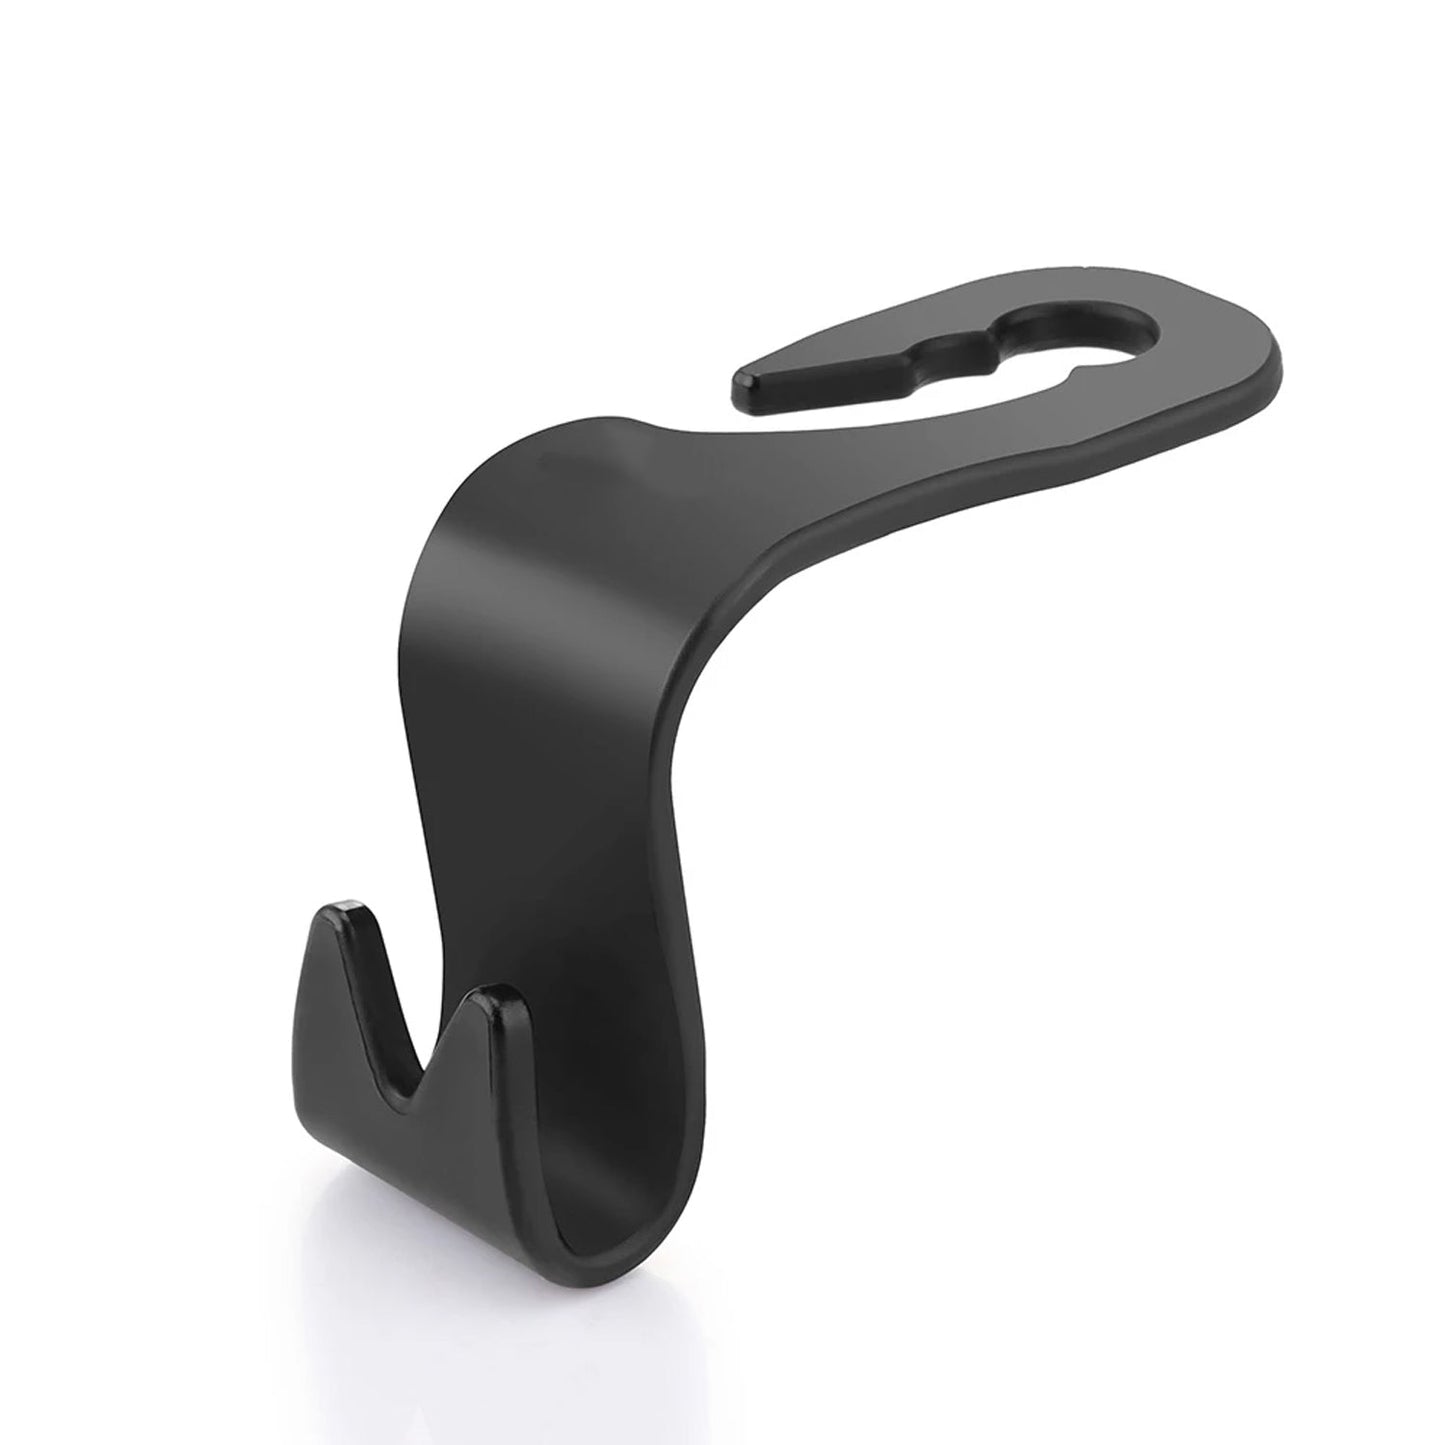 Car Backrest Hanger and backrest stand for giving support and stance to drivers.